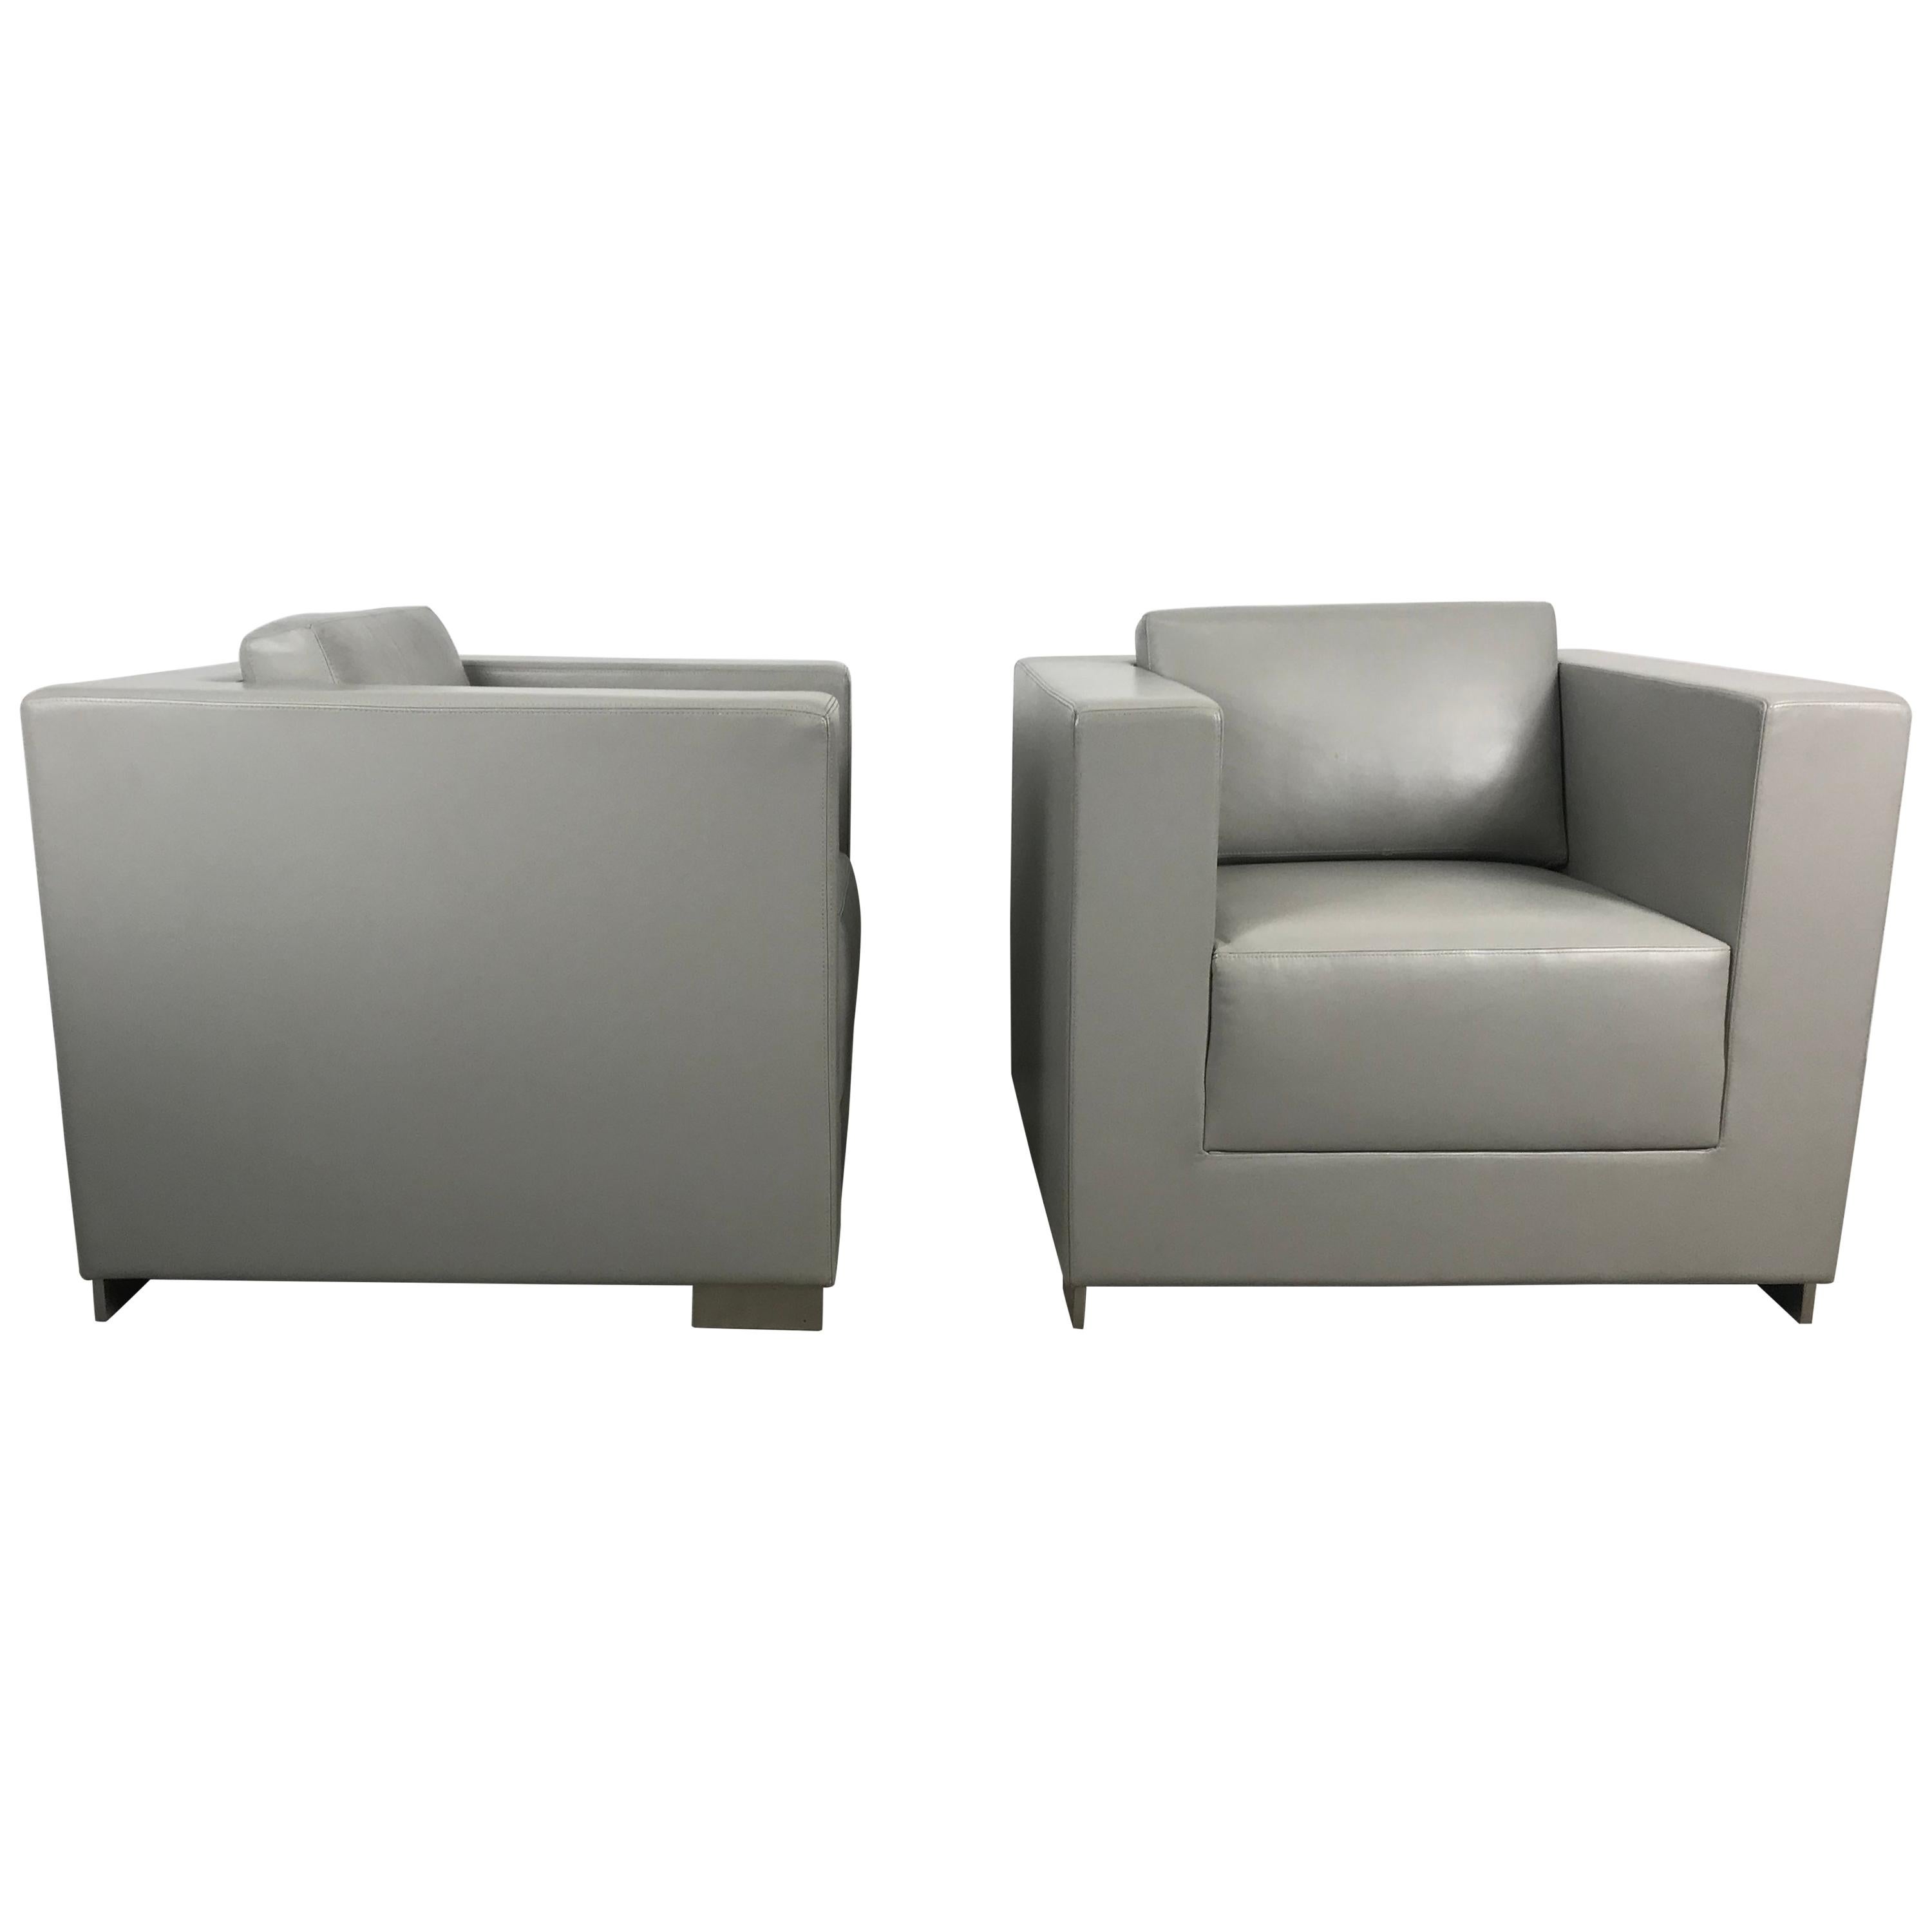 Stunning Pair of Leather Cube Lounge Chairs by Fabien Baron for Bernhardt Design